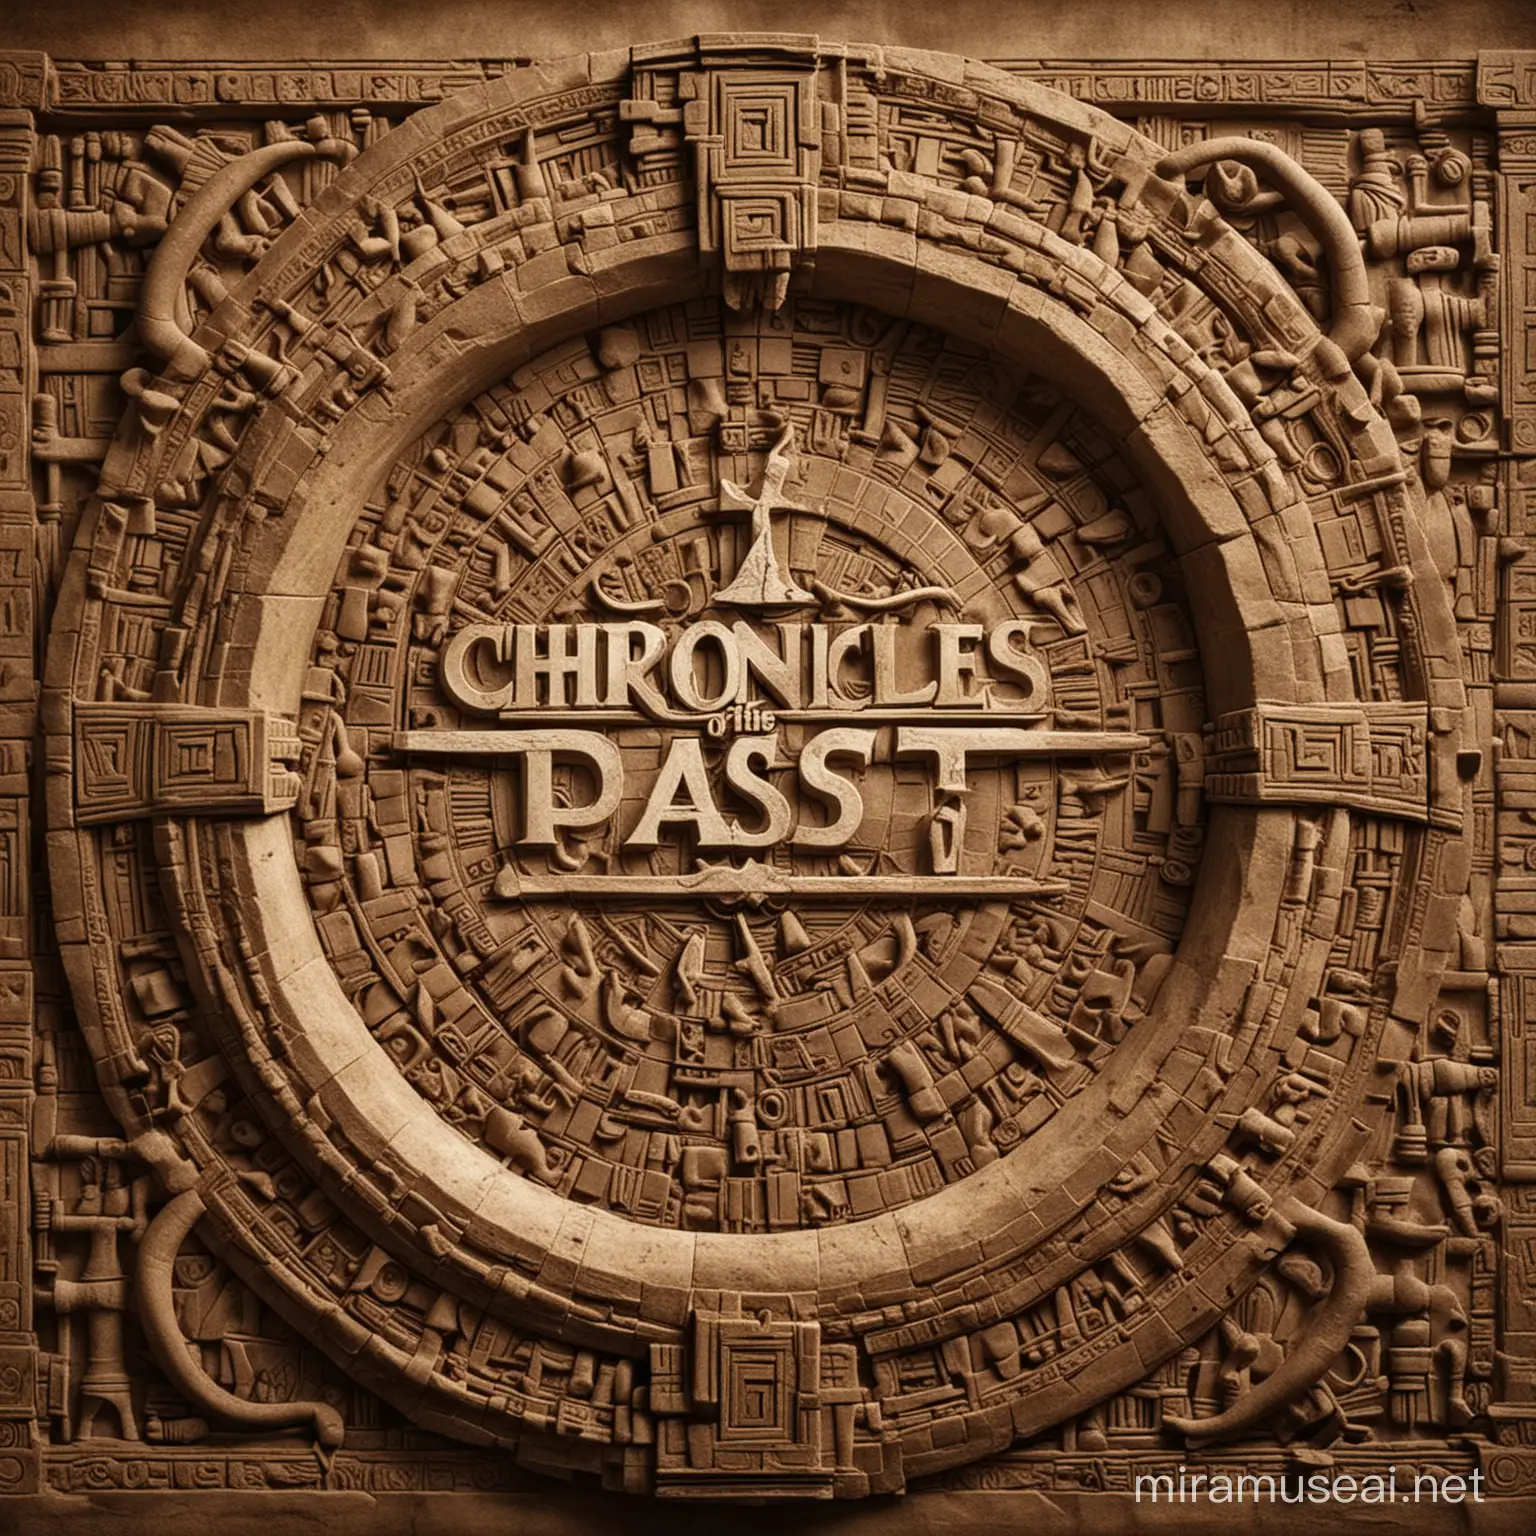 Chronicles of the Past' depicting a blend of ancient and modern elements symbolizing historical exploration and storytelling."